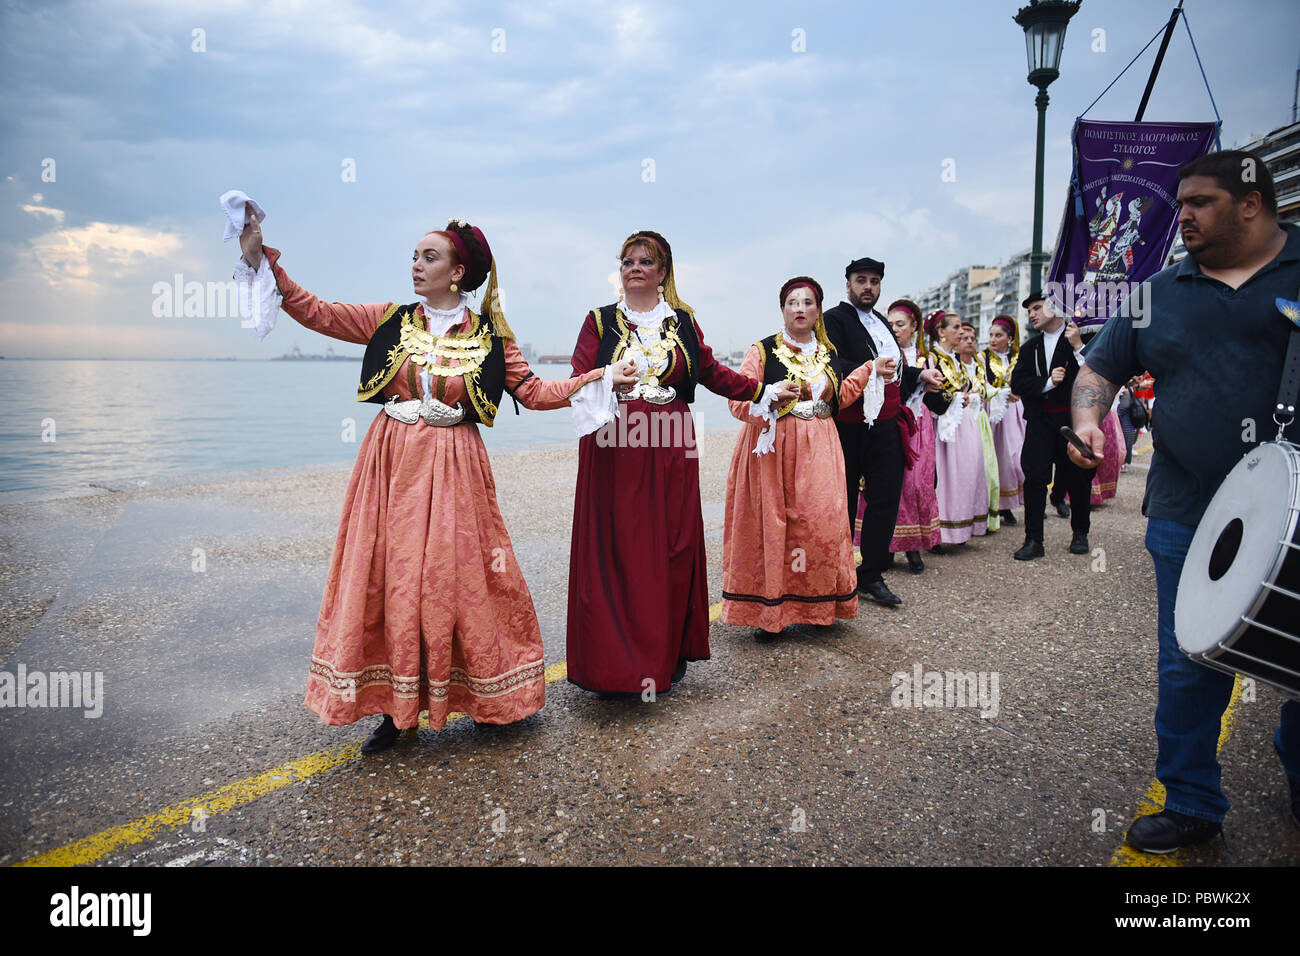 Thessaloniki Greece 30th July 2018 Hundreds Of People Dressed In Traditional Costumes Dance A Traditional Macedonian